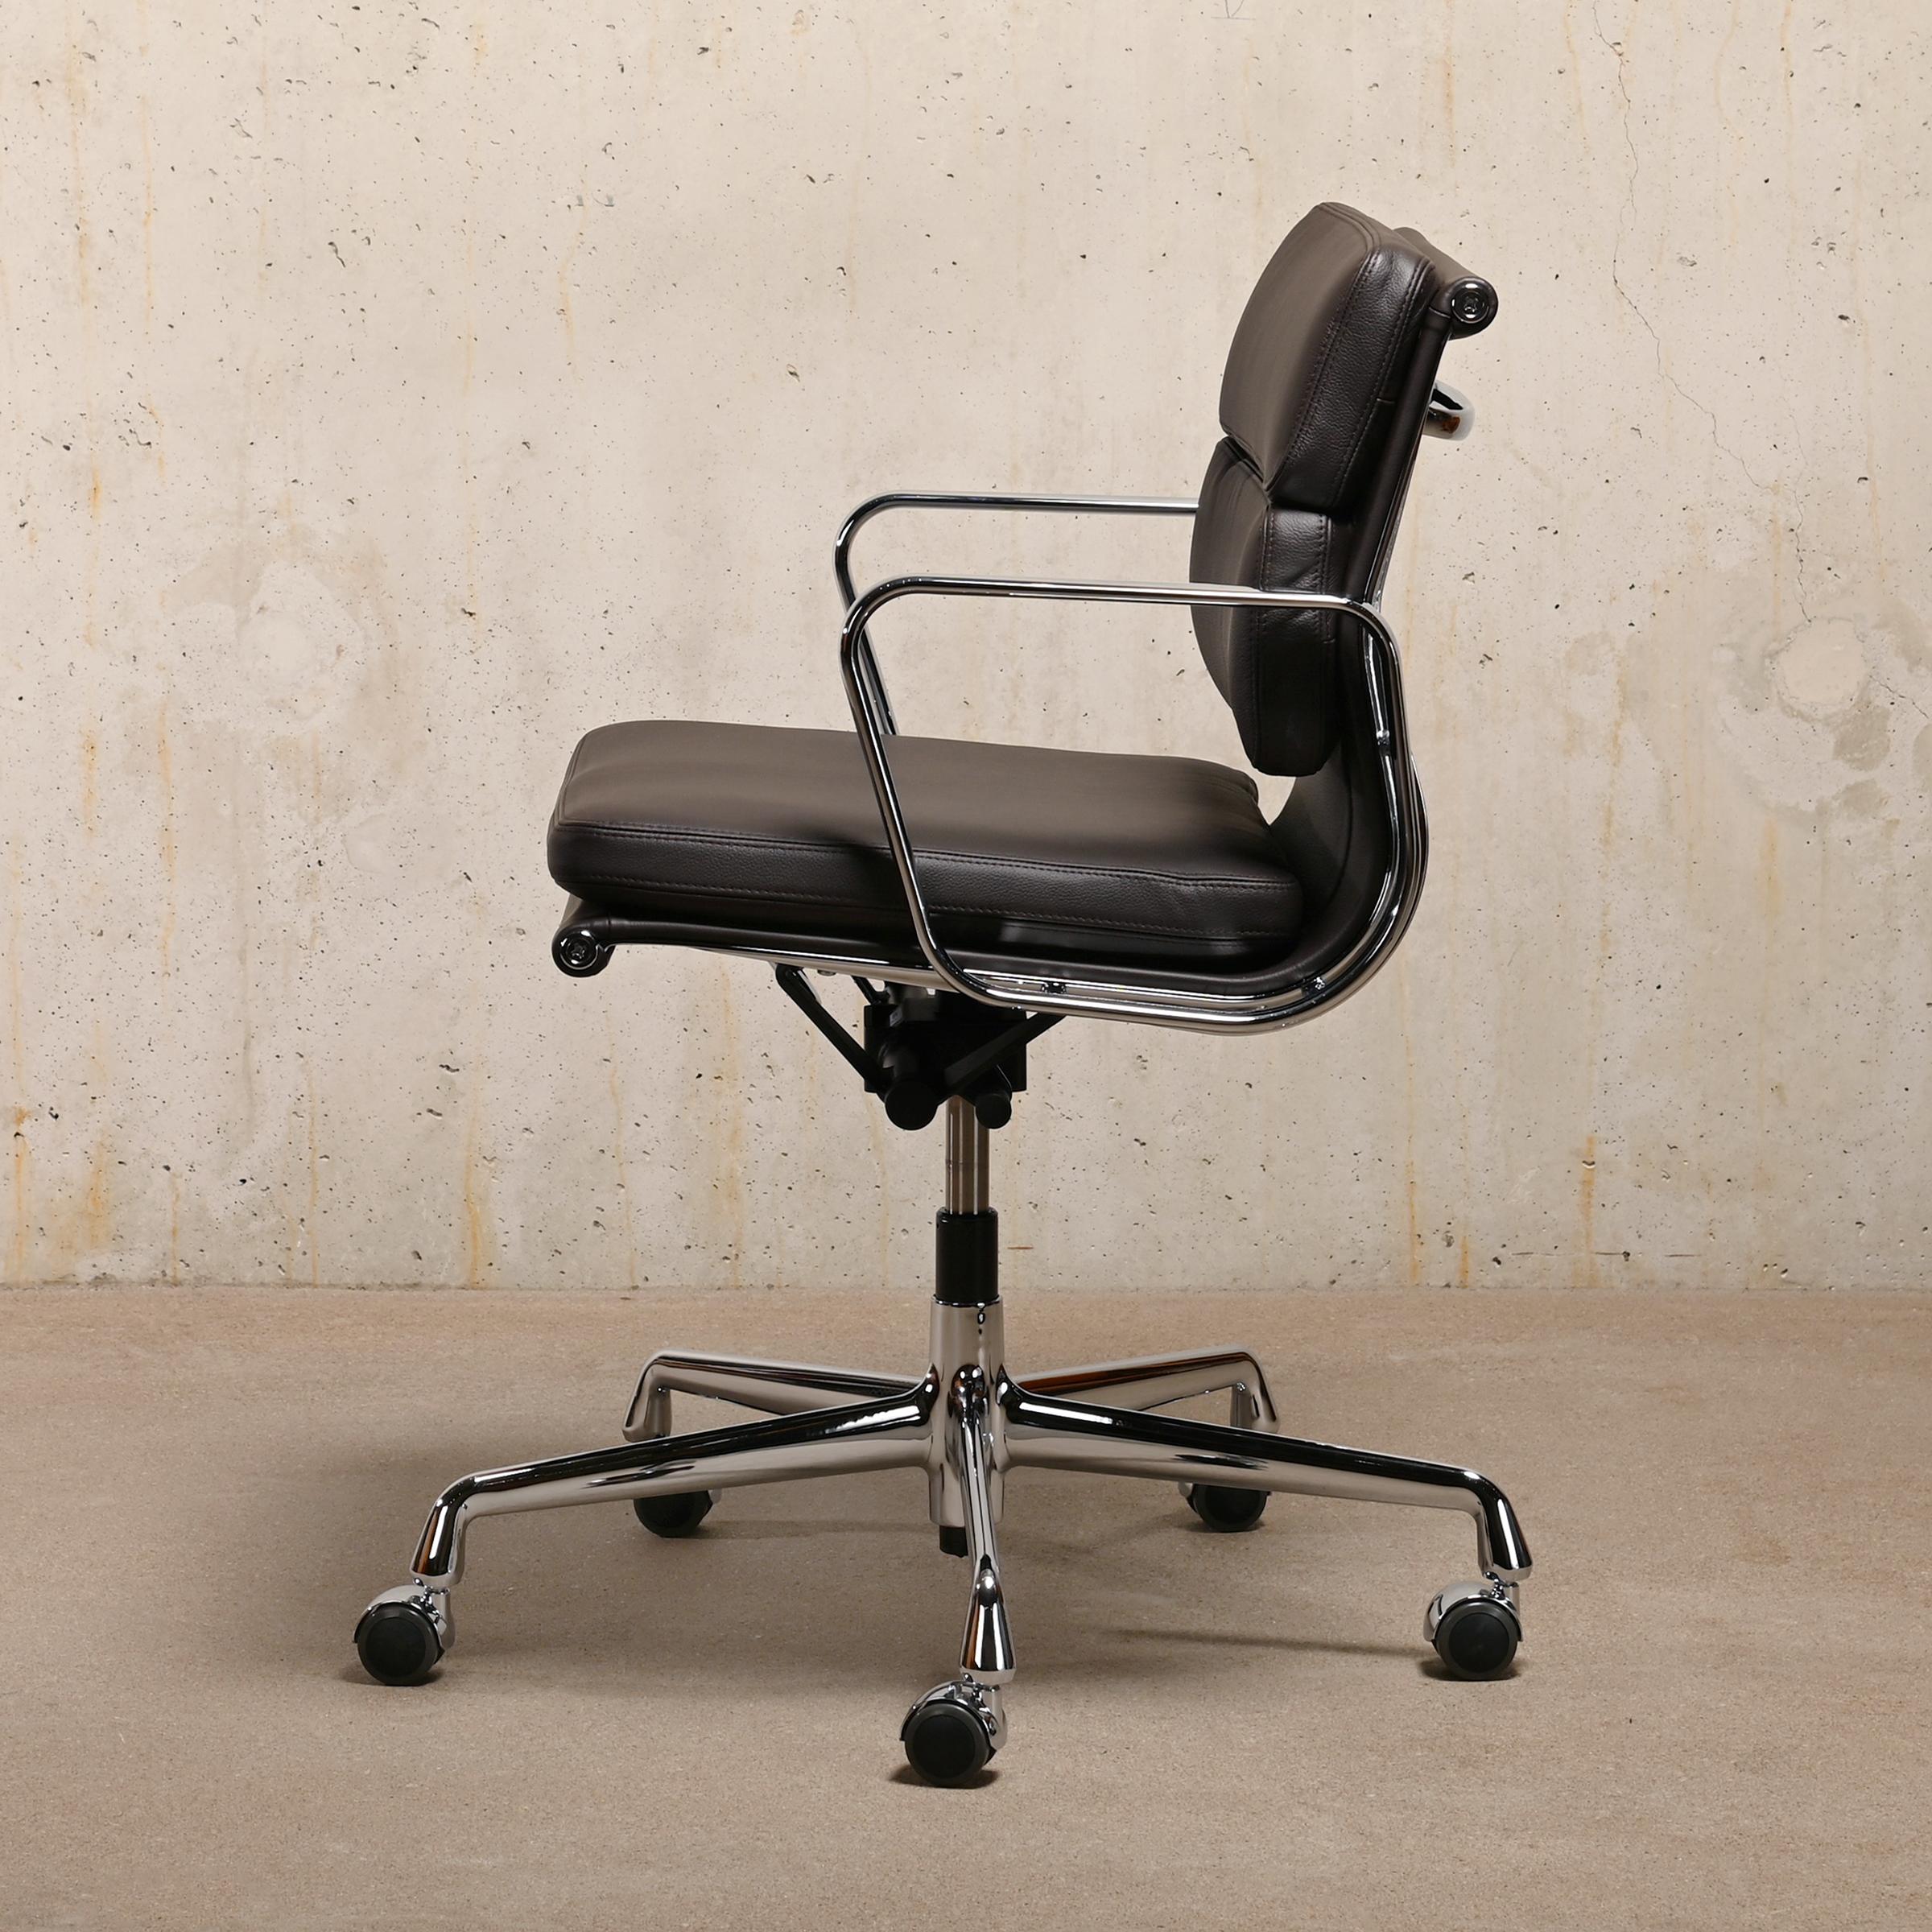 Aluminum Charles & Ray Eames EA217 Office Chair in Chocolate Brown Leather, Vitra For Sale